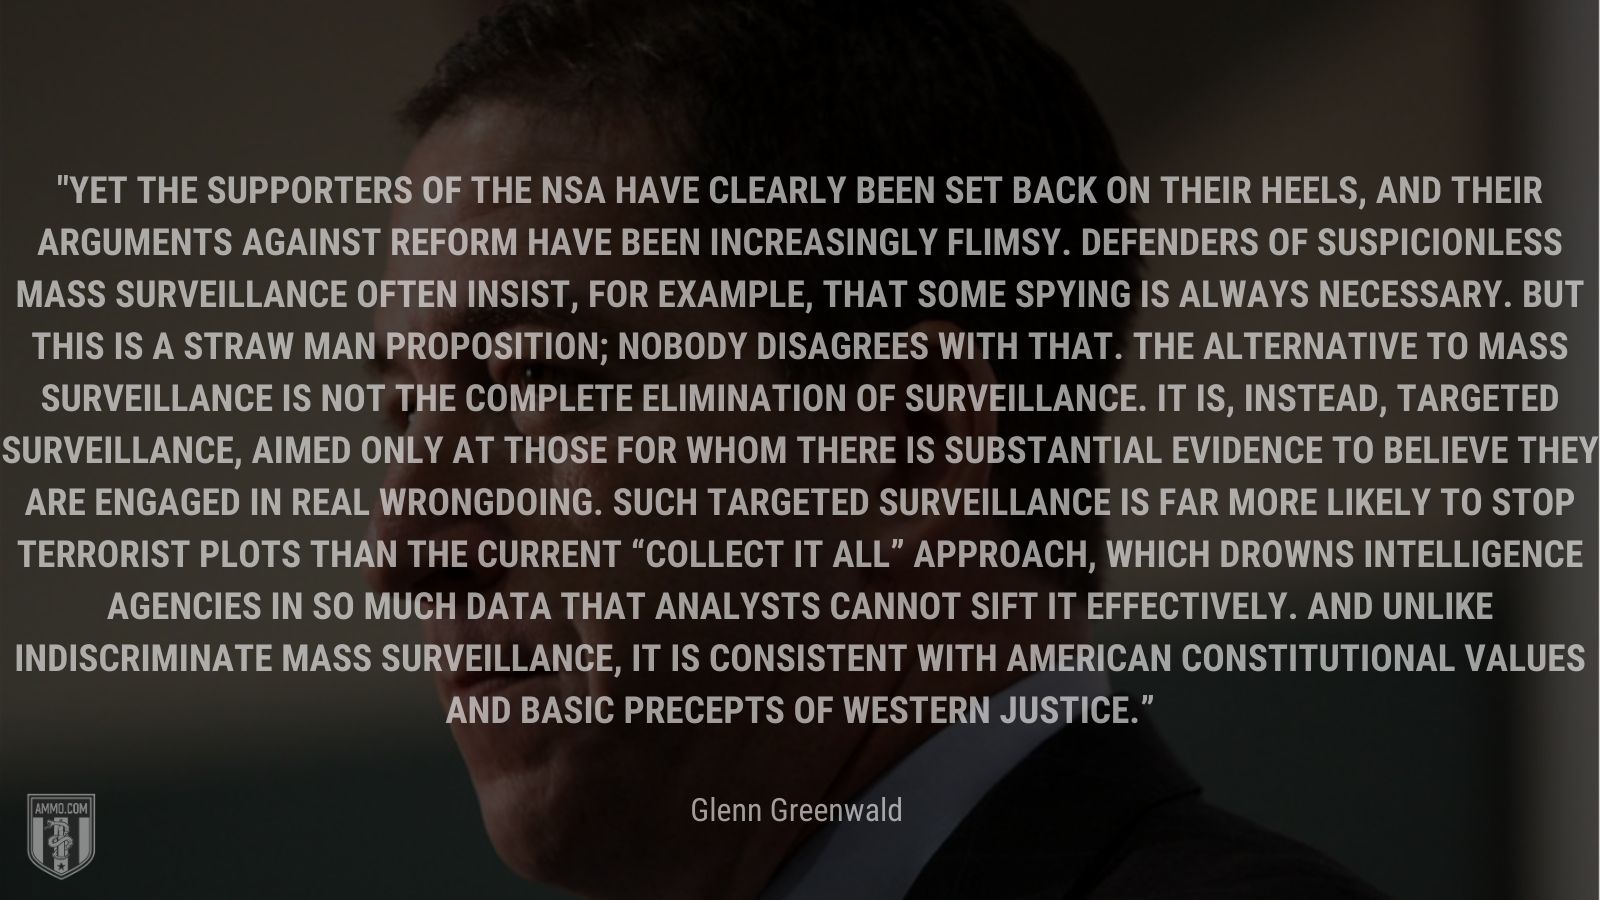 “Yet the supporters of the NSA have clearly been set back on their heels, and their arguments against reform have been increasingly flimsy. Defenders of suspicionless mass surveillance often insist, for example, that some spying is always necessary. But this is a straw man proposition; nobody disagrees with that. The alternative to mass surveillance is not the complete elimination of surveillance. It is, instead, targeted surveillance, aimed only at those for whom there is substantial evidence to believe they are engaged in real wrongdoing. Such targeted surveillance is far more likely to stop terrorist plots than the current “collect it all” approach, which drowns intelligence agencies in so much data that analysts cannot sift it effectively. And unlike indiscriminate mass surveillance, it is consistent with American constitutional values and basic precepts of Western justice.” - Glenn Greenwald